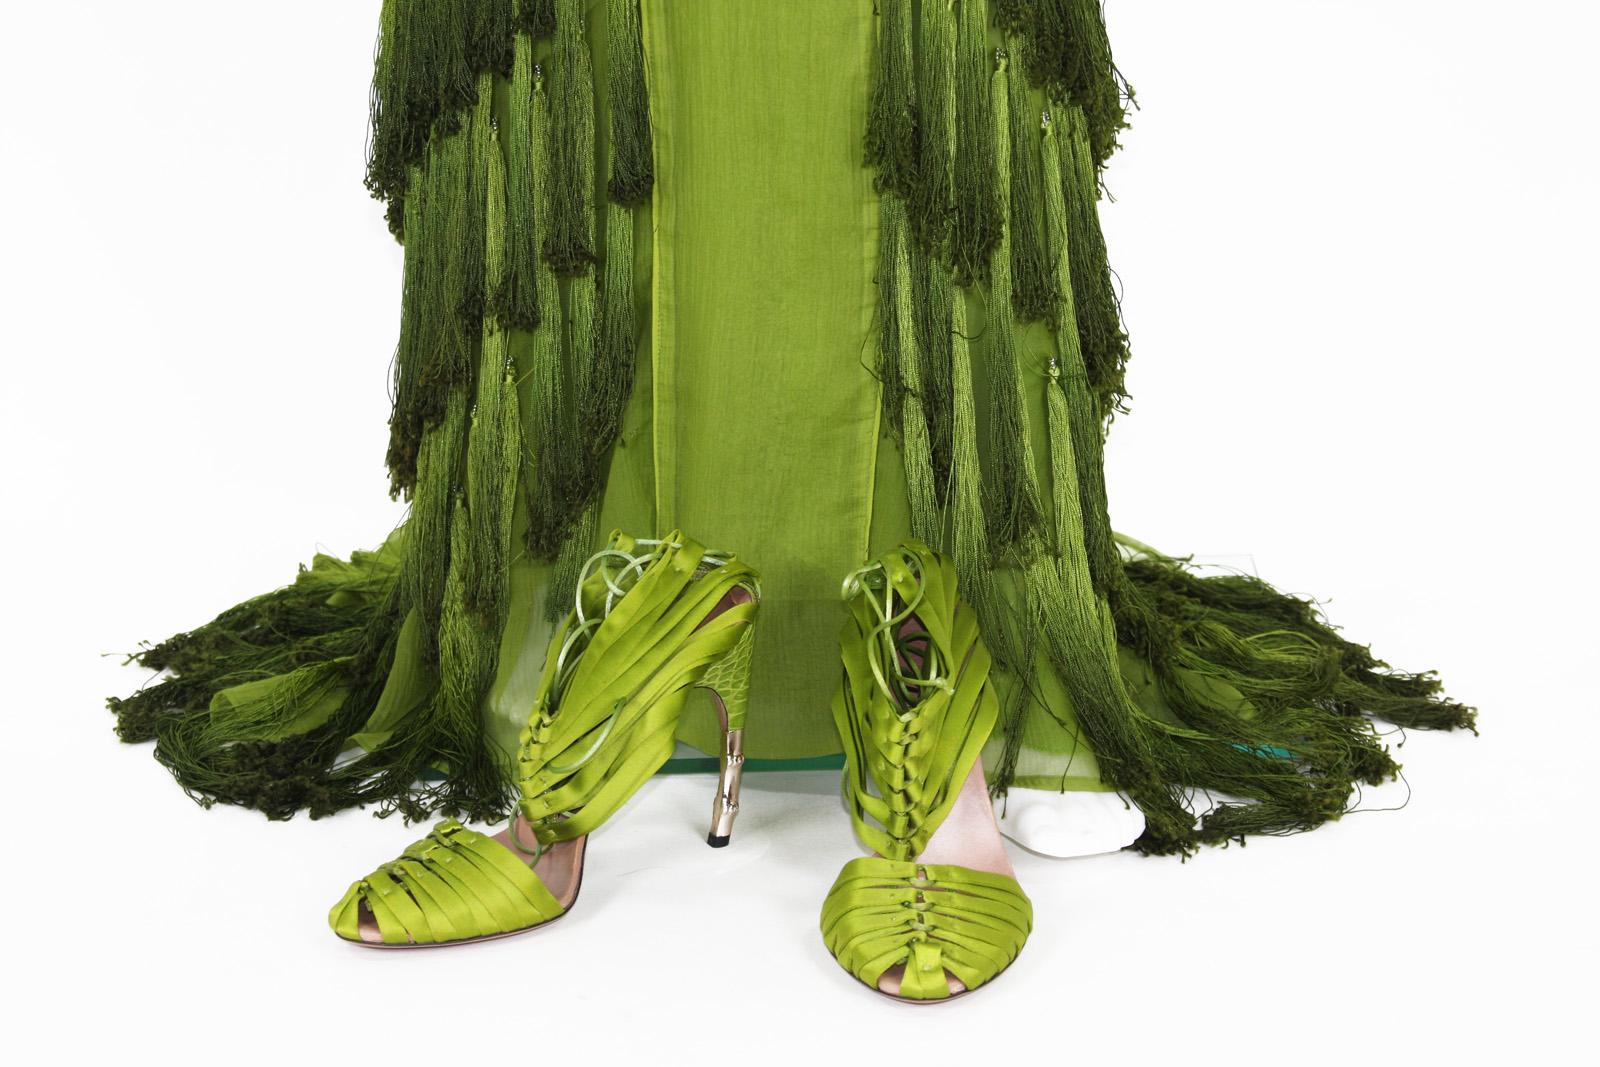 Tom Ford for Gucci 2004 F/W Collection Silk Green Tassel Dress Gown 40 - 4 6